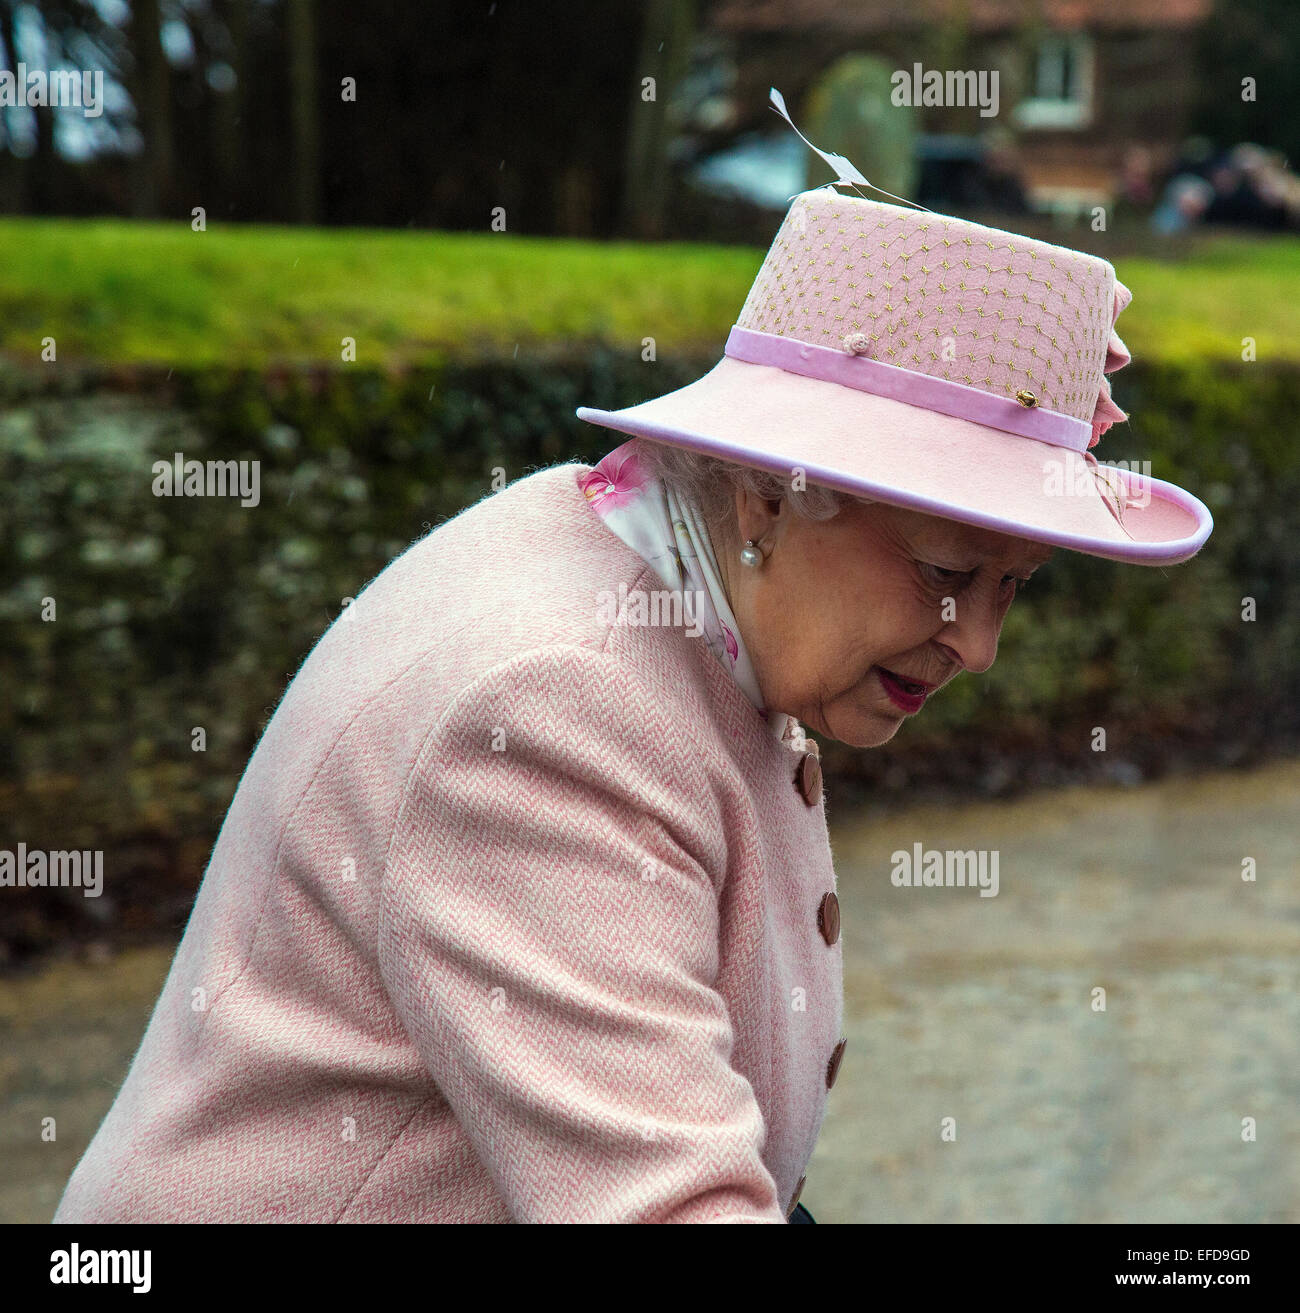 West Newton, Norfolk. 1st Feb, 2015. HM Queen Elizabeth II attends the morning service at West Newton. A small crowd of well wishers were there to see the Queen and Prince Philip. Credit:  Ian Ward/Alamy Live News Stock Photo